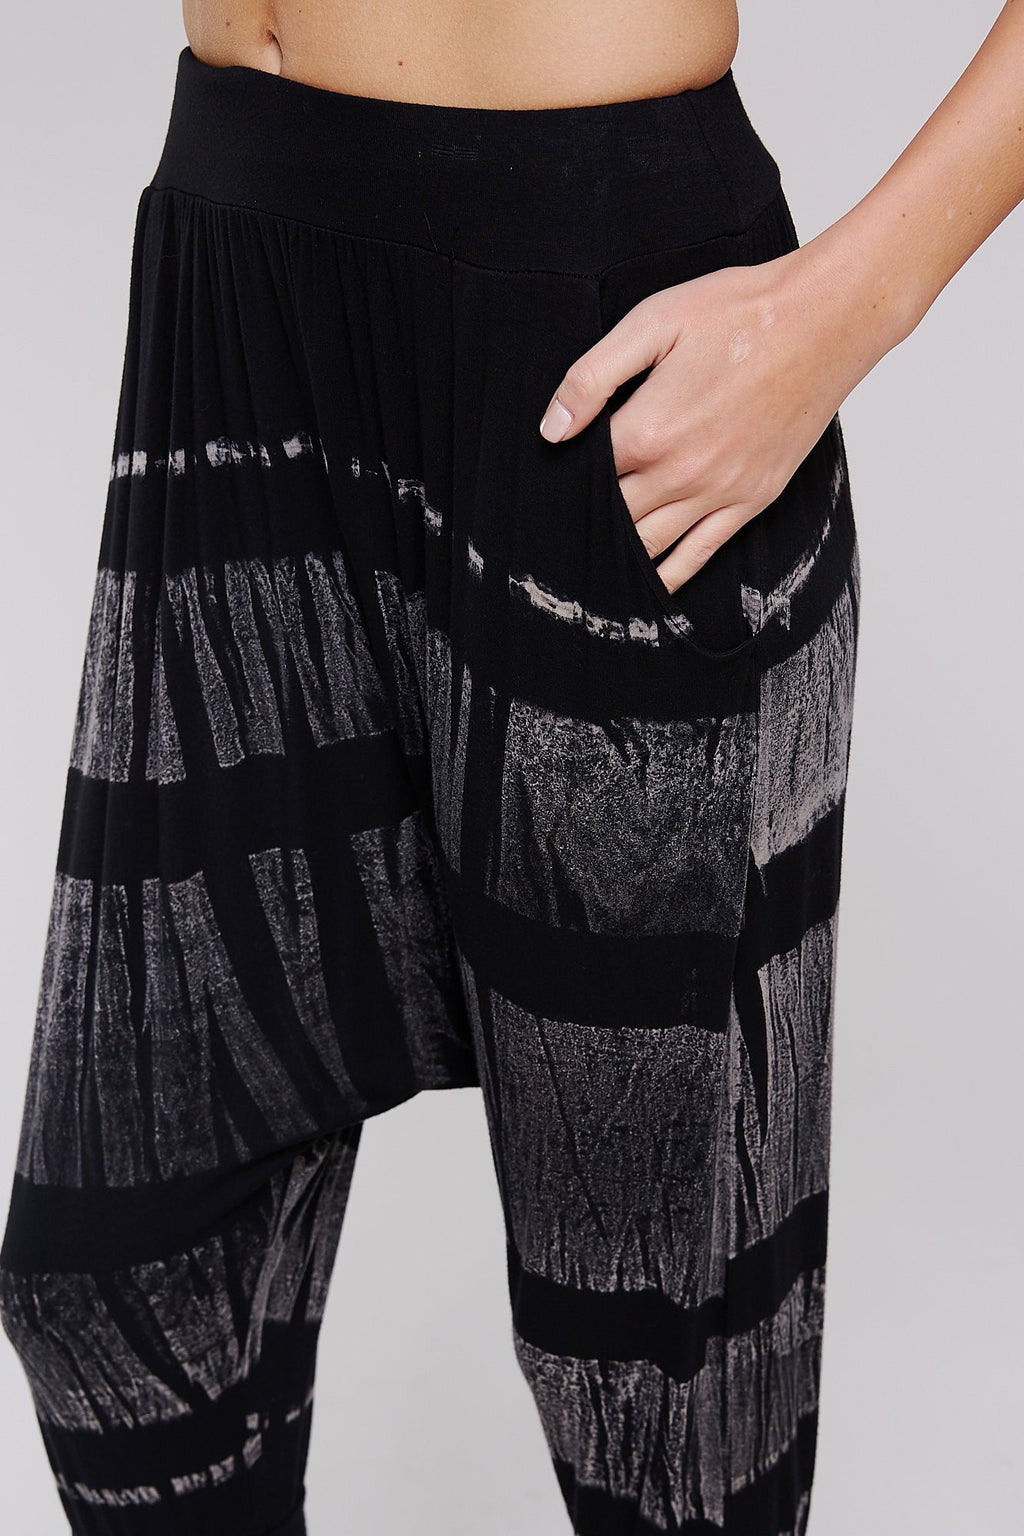 Paneled Tie-dye cropped harem pants with banded hem are perfect for any activity.